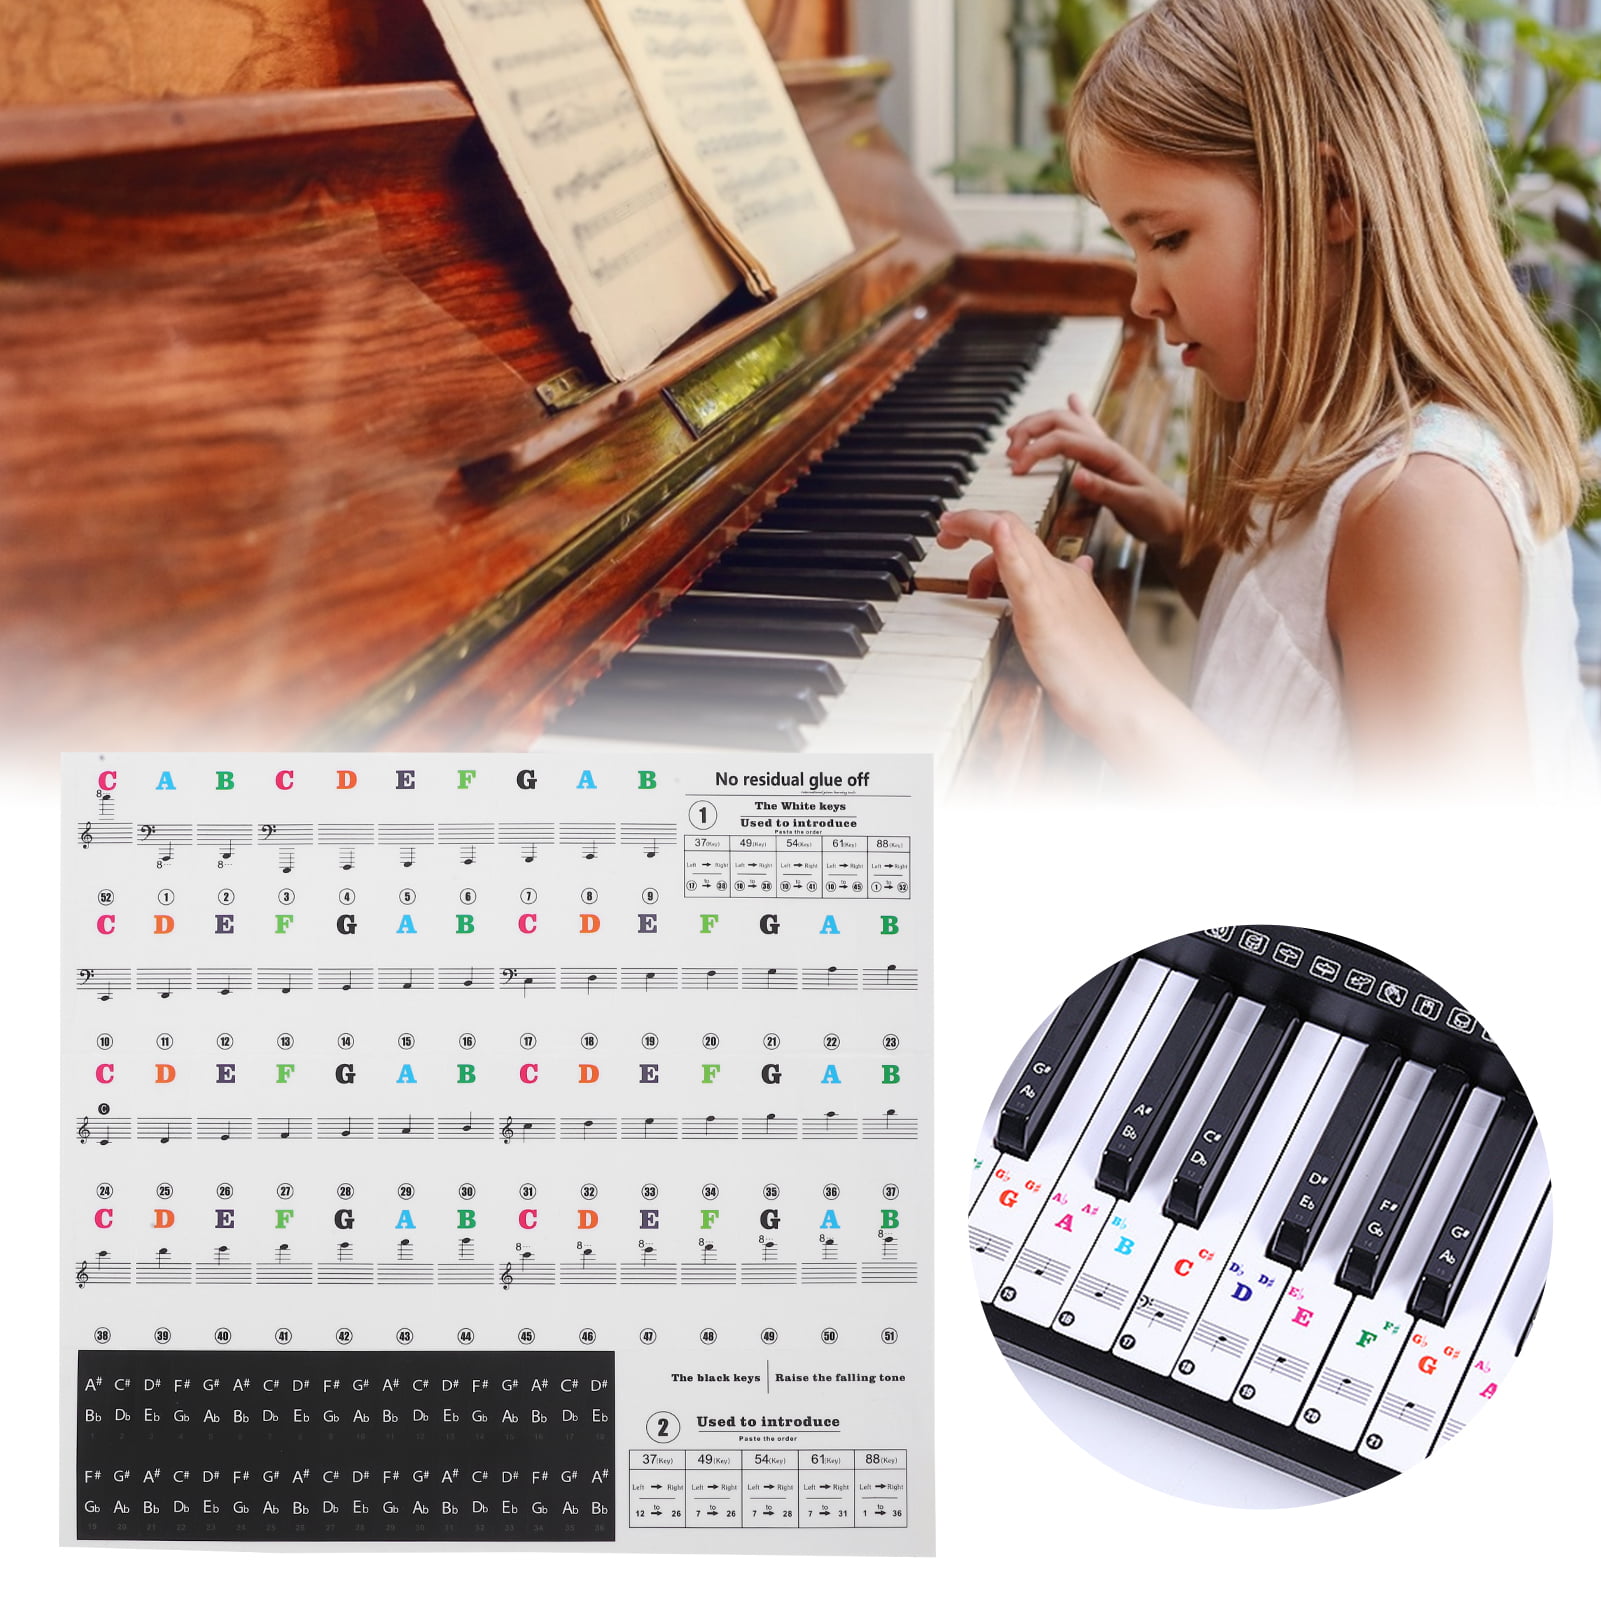 Piano Sticker, Transparent Pvc Material Sheet Music Stickers For  Hand-Rolled Pianos For Electronic Organs Color Letters 